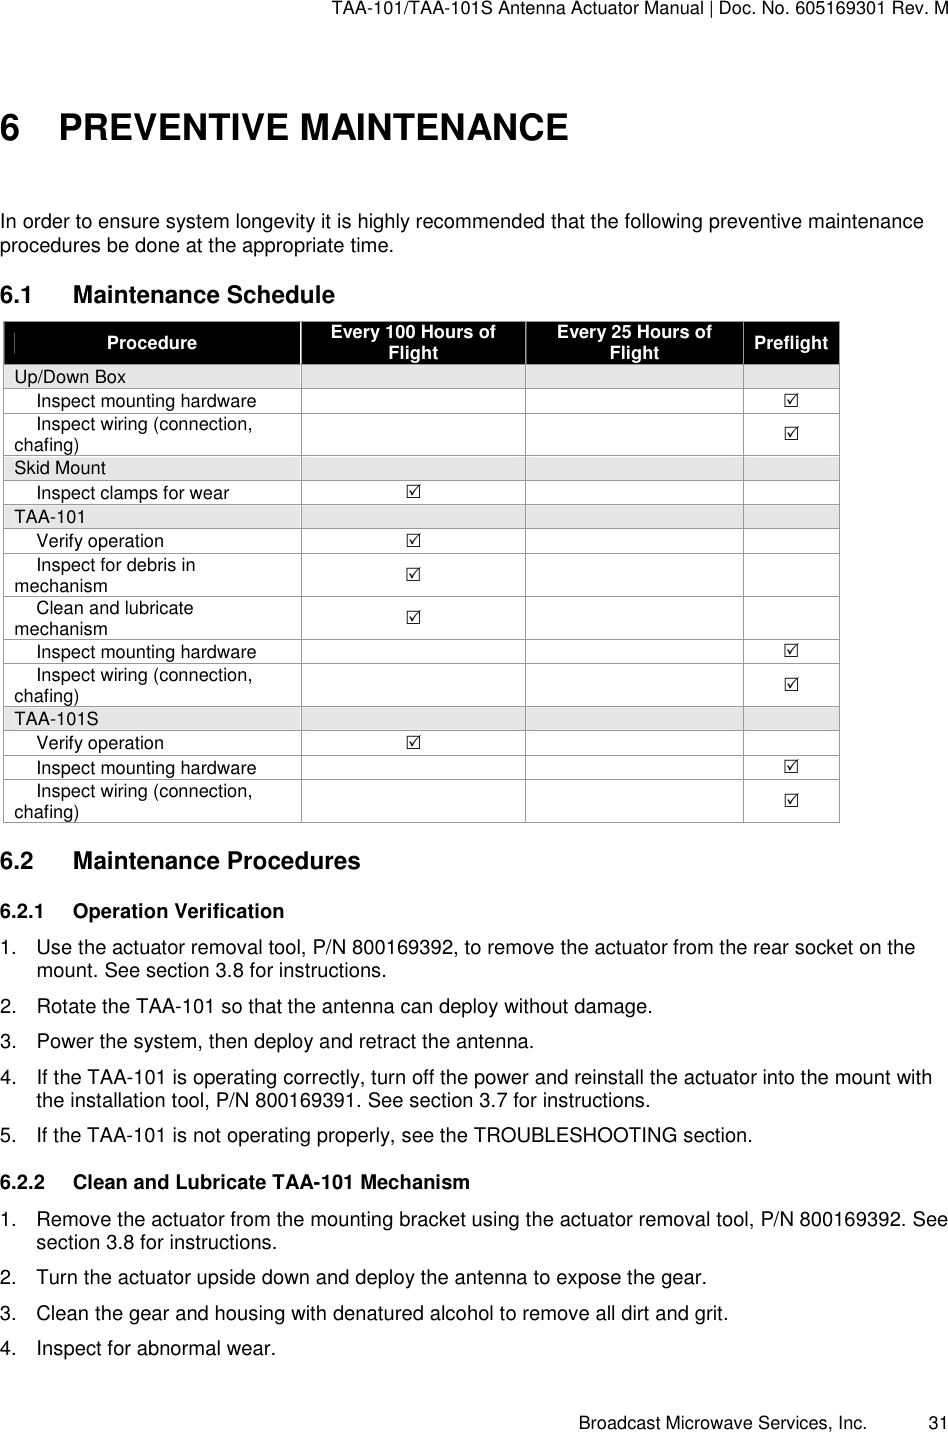 TAA-101/TAA-101S Antenna Actuator Manual | Doc. No. 605169301 Rev. M Broadcast Microwave Services, Inc.      31 6  PREVENTIVE MAINTENANCE In order to ensure system longevity it is highly recommended that the following preventive maintenance procedures be done at the appropriate time.   6.1  Maintenance Schedule Procedure Every 100 Hours of Flight Every 25 Hours of Flight  Preflight Up/Down Box         Inspect mounting hardware         Inspect wiring (connection, chafing)      Skid Mount         Inspect clamps for wear      TAA-101         Verify operation        Inspect for debris in mechanism       Clean and lubricate mechanism        Inspect mounting hardware         Inspect wiring (connection, chafing)       TAA-101S         Verify operation        Inspect mounting hardware         Inspect wiring (connection, chafing)      6.2  Maintenance Procedures 6.2.1  Operation Verification 1.  Use the actuator removal tool, P/N 800169392, to remove the actuator from the rear socket on the mount. See section 3.8 for instructions. 2.  Rotate the TAA-101 so that the antenna can deploy without damage. 3.  Power the system, then deploy and retract the antenna. 4.  If the TAA-101 is operating correctly, turn off the power and reinstall the actuator into the mount with the installation tool, P/N 800169391. See section 3.7 for instructions. 5.  If the TAA-101 is not operating properly, see the TROUBLESHOOTING section.  6.2.2  Clean and Lubricate TAA-101 Mechanism 1.  Remove the actuator from the mounting bracket using the actuator removal tool, P/N 800169392. See section 3.8 for instructions. 2.  Turn the actuator upside down and deploy the antenna to expose the gear. 3.  Clean the gear and housing with denatured alcohol to remove all dirt and grit. 4.  Inspect for abnormal wear. 